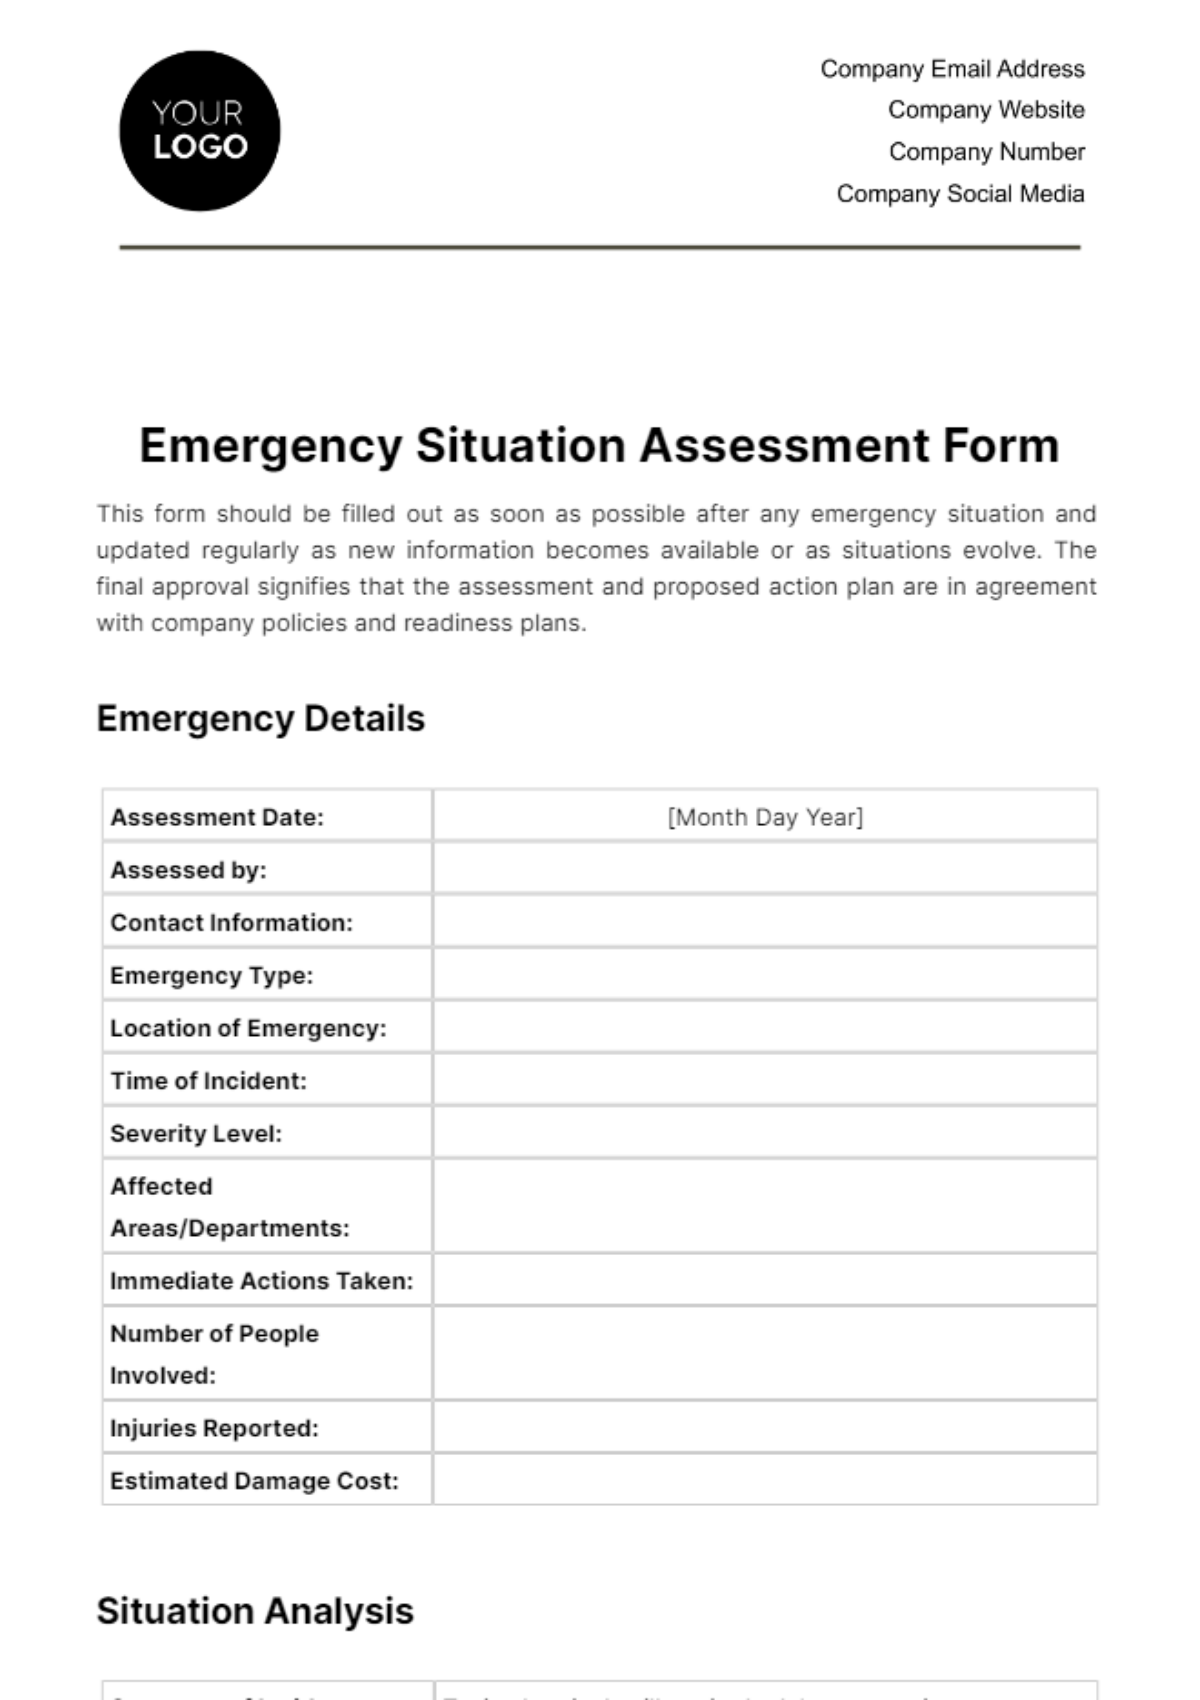 Emergency Situation Assessment Form Template